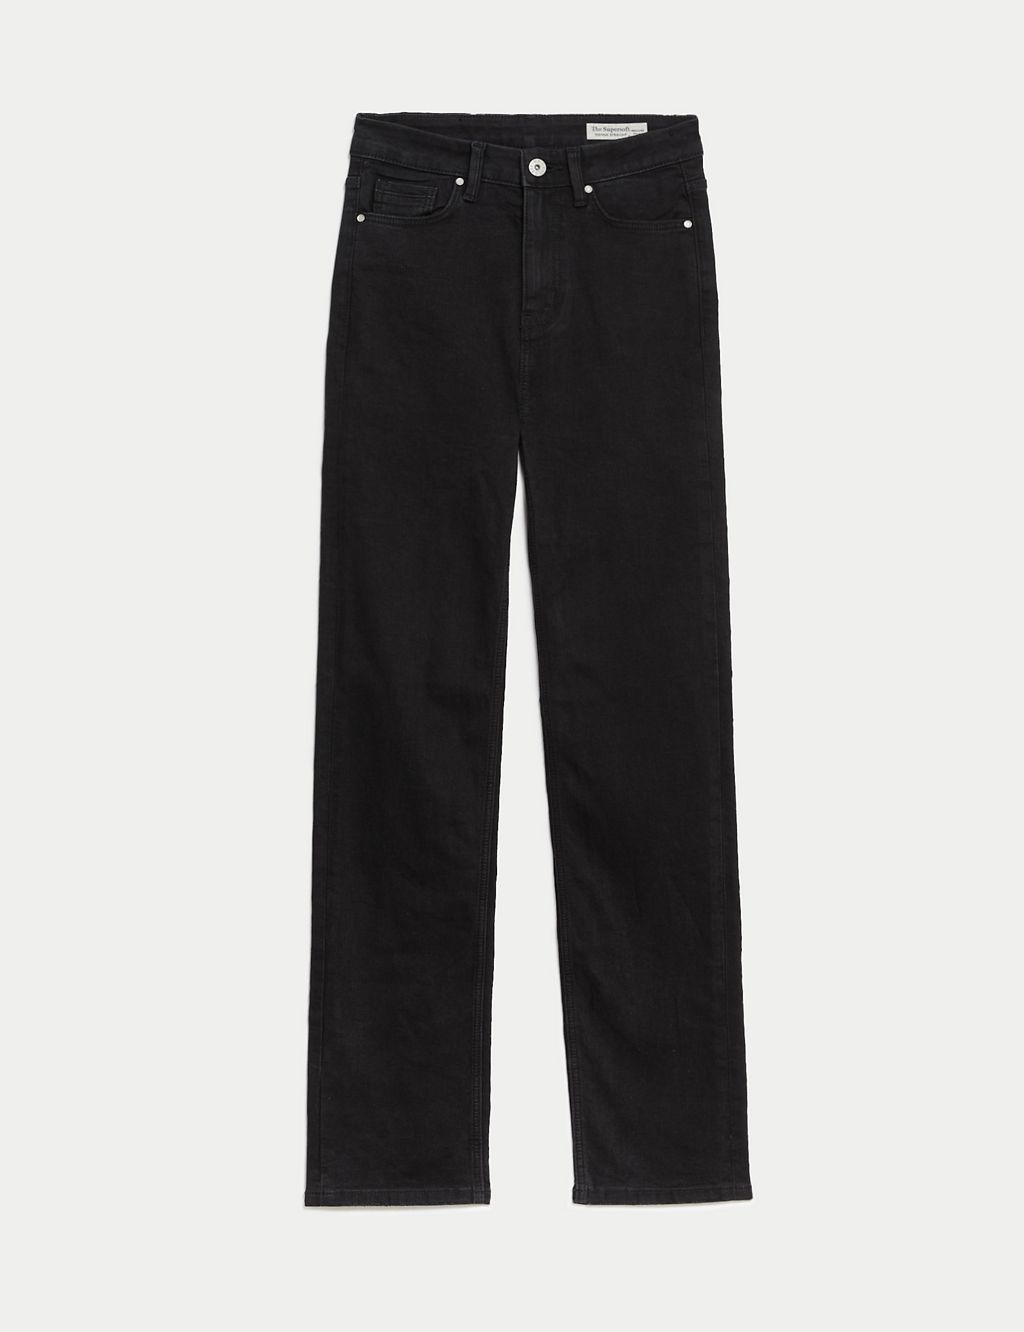 Sienna Supersoft Straight Leg Jeans 1 of 6